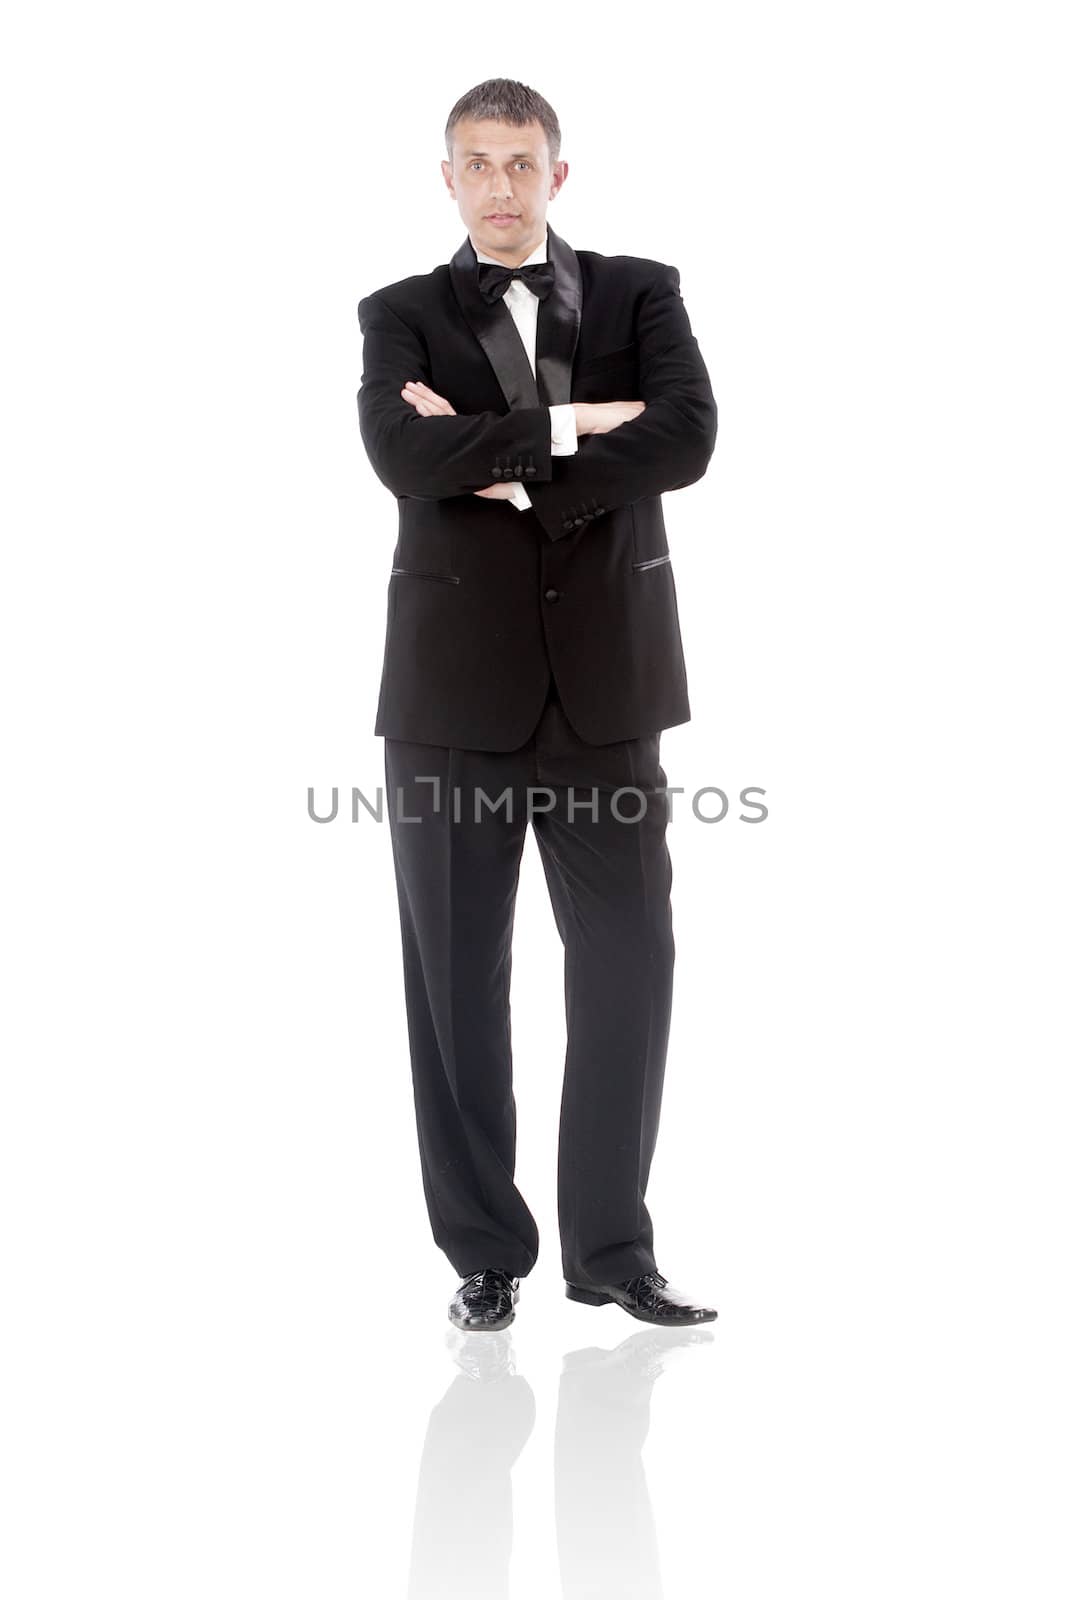 The elegant man in a classical tuxedo on a white background